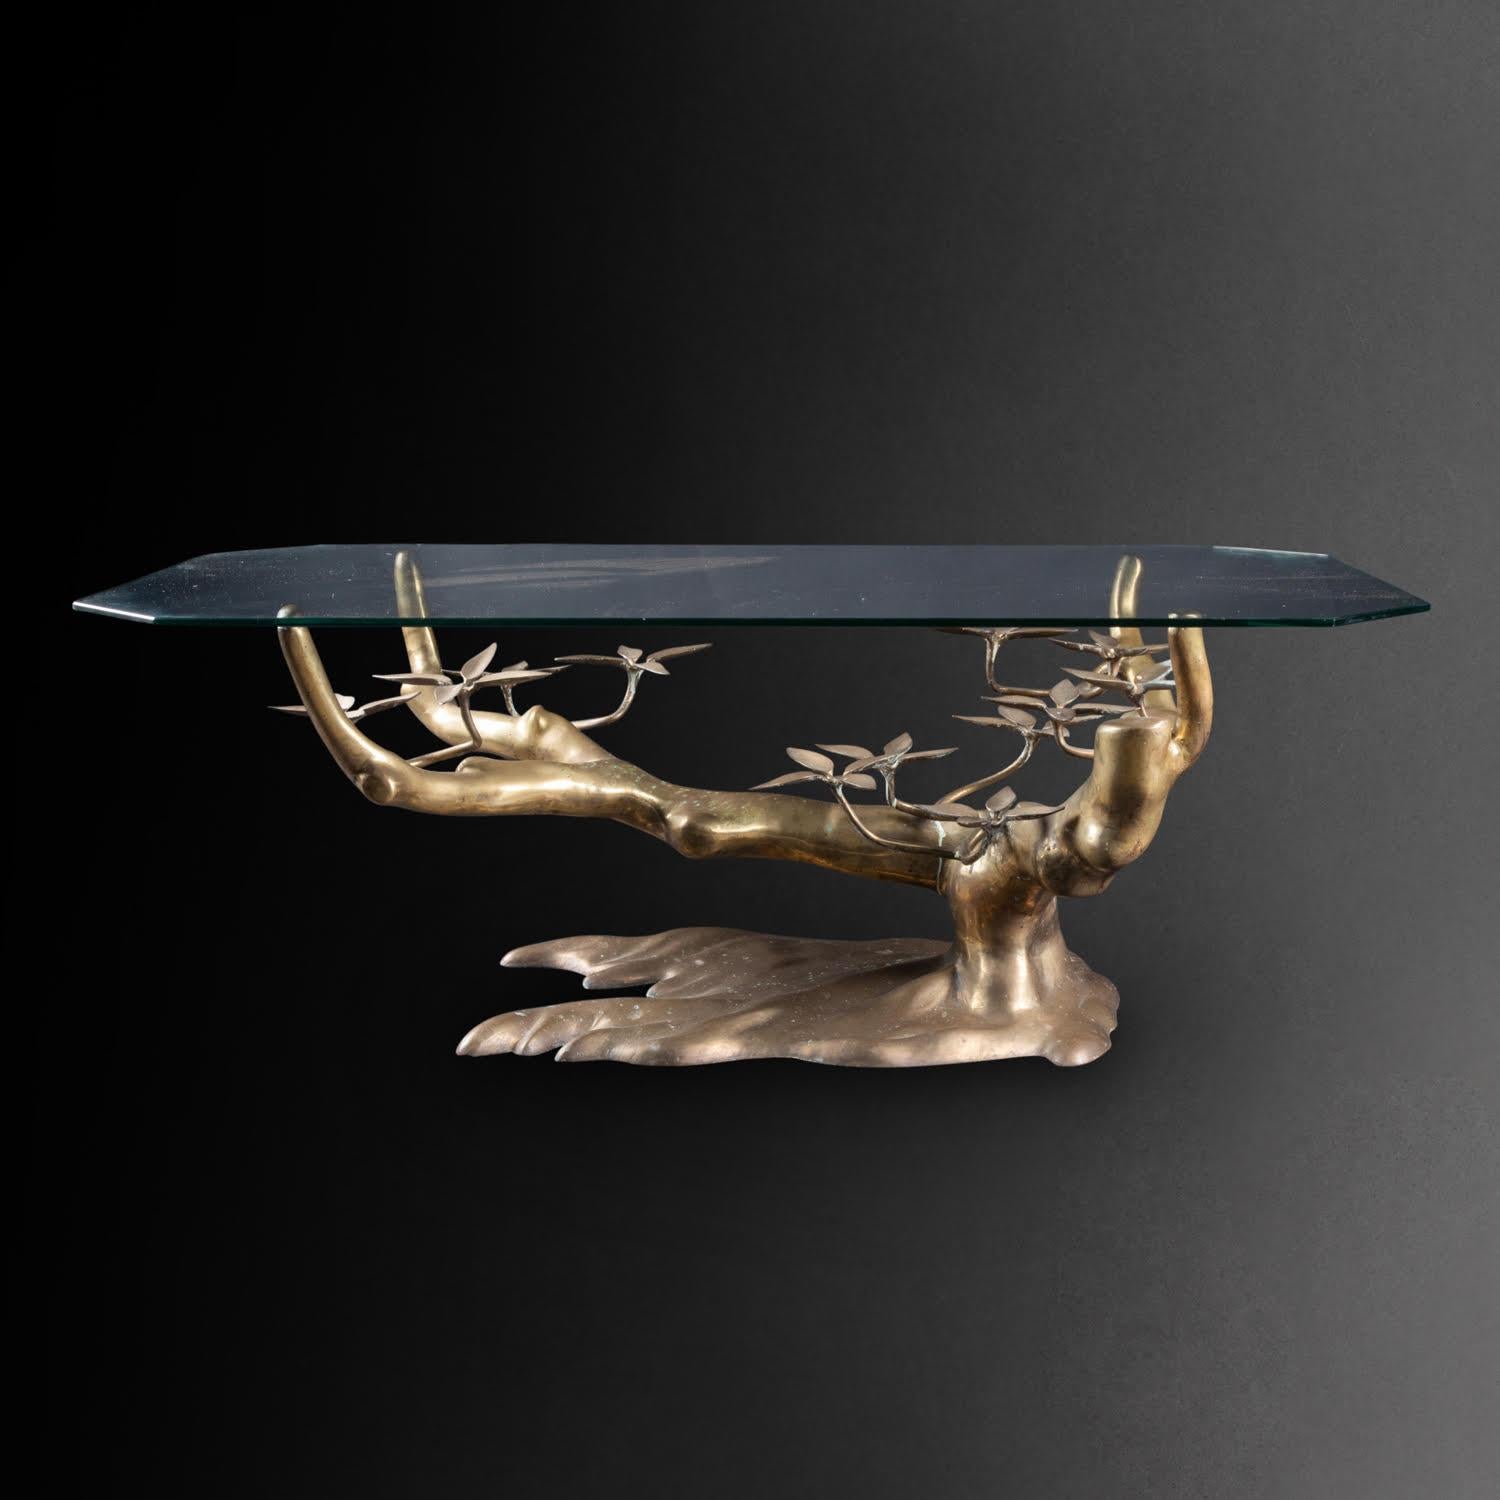 Coffee table by Willi Daro, Bronze and glass top, XXth Century.

Coffee table inspired by a Bonsai tree, bronze and glass top by Willi Daro, 20th century.  
H: 42,5cm , W: 115cm, D: 60cm